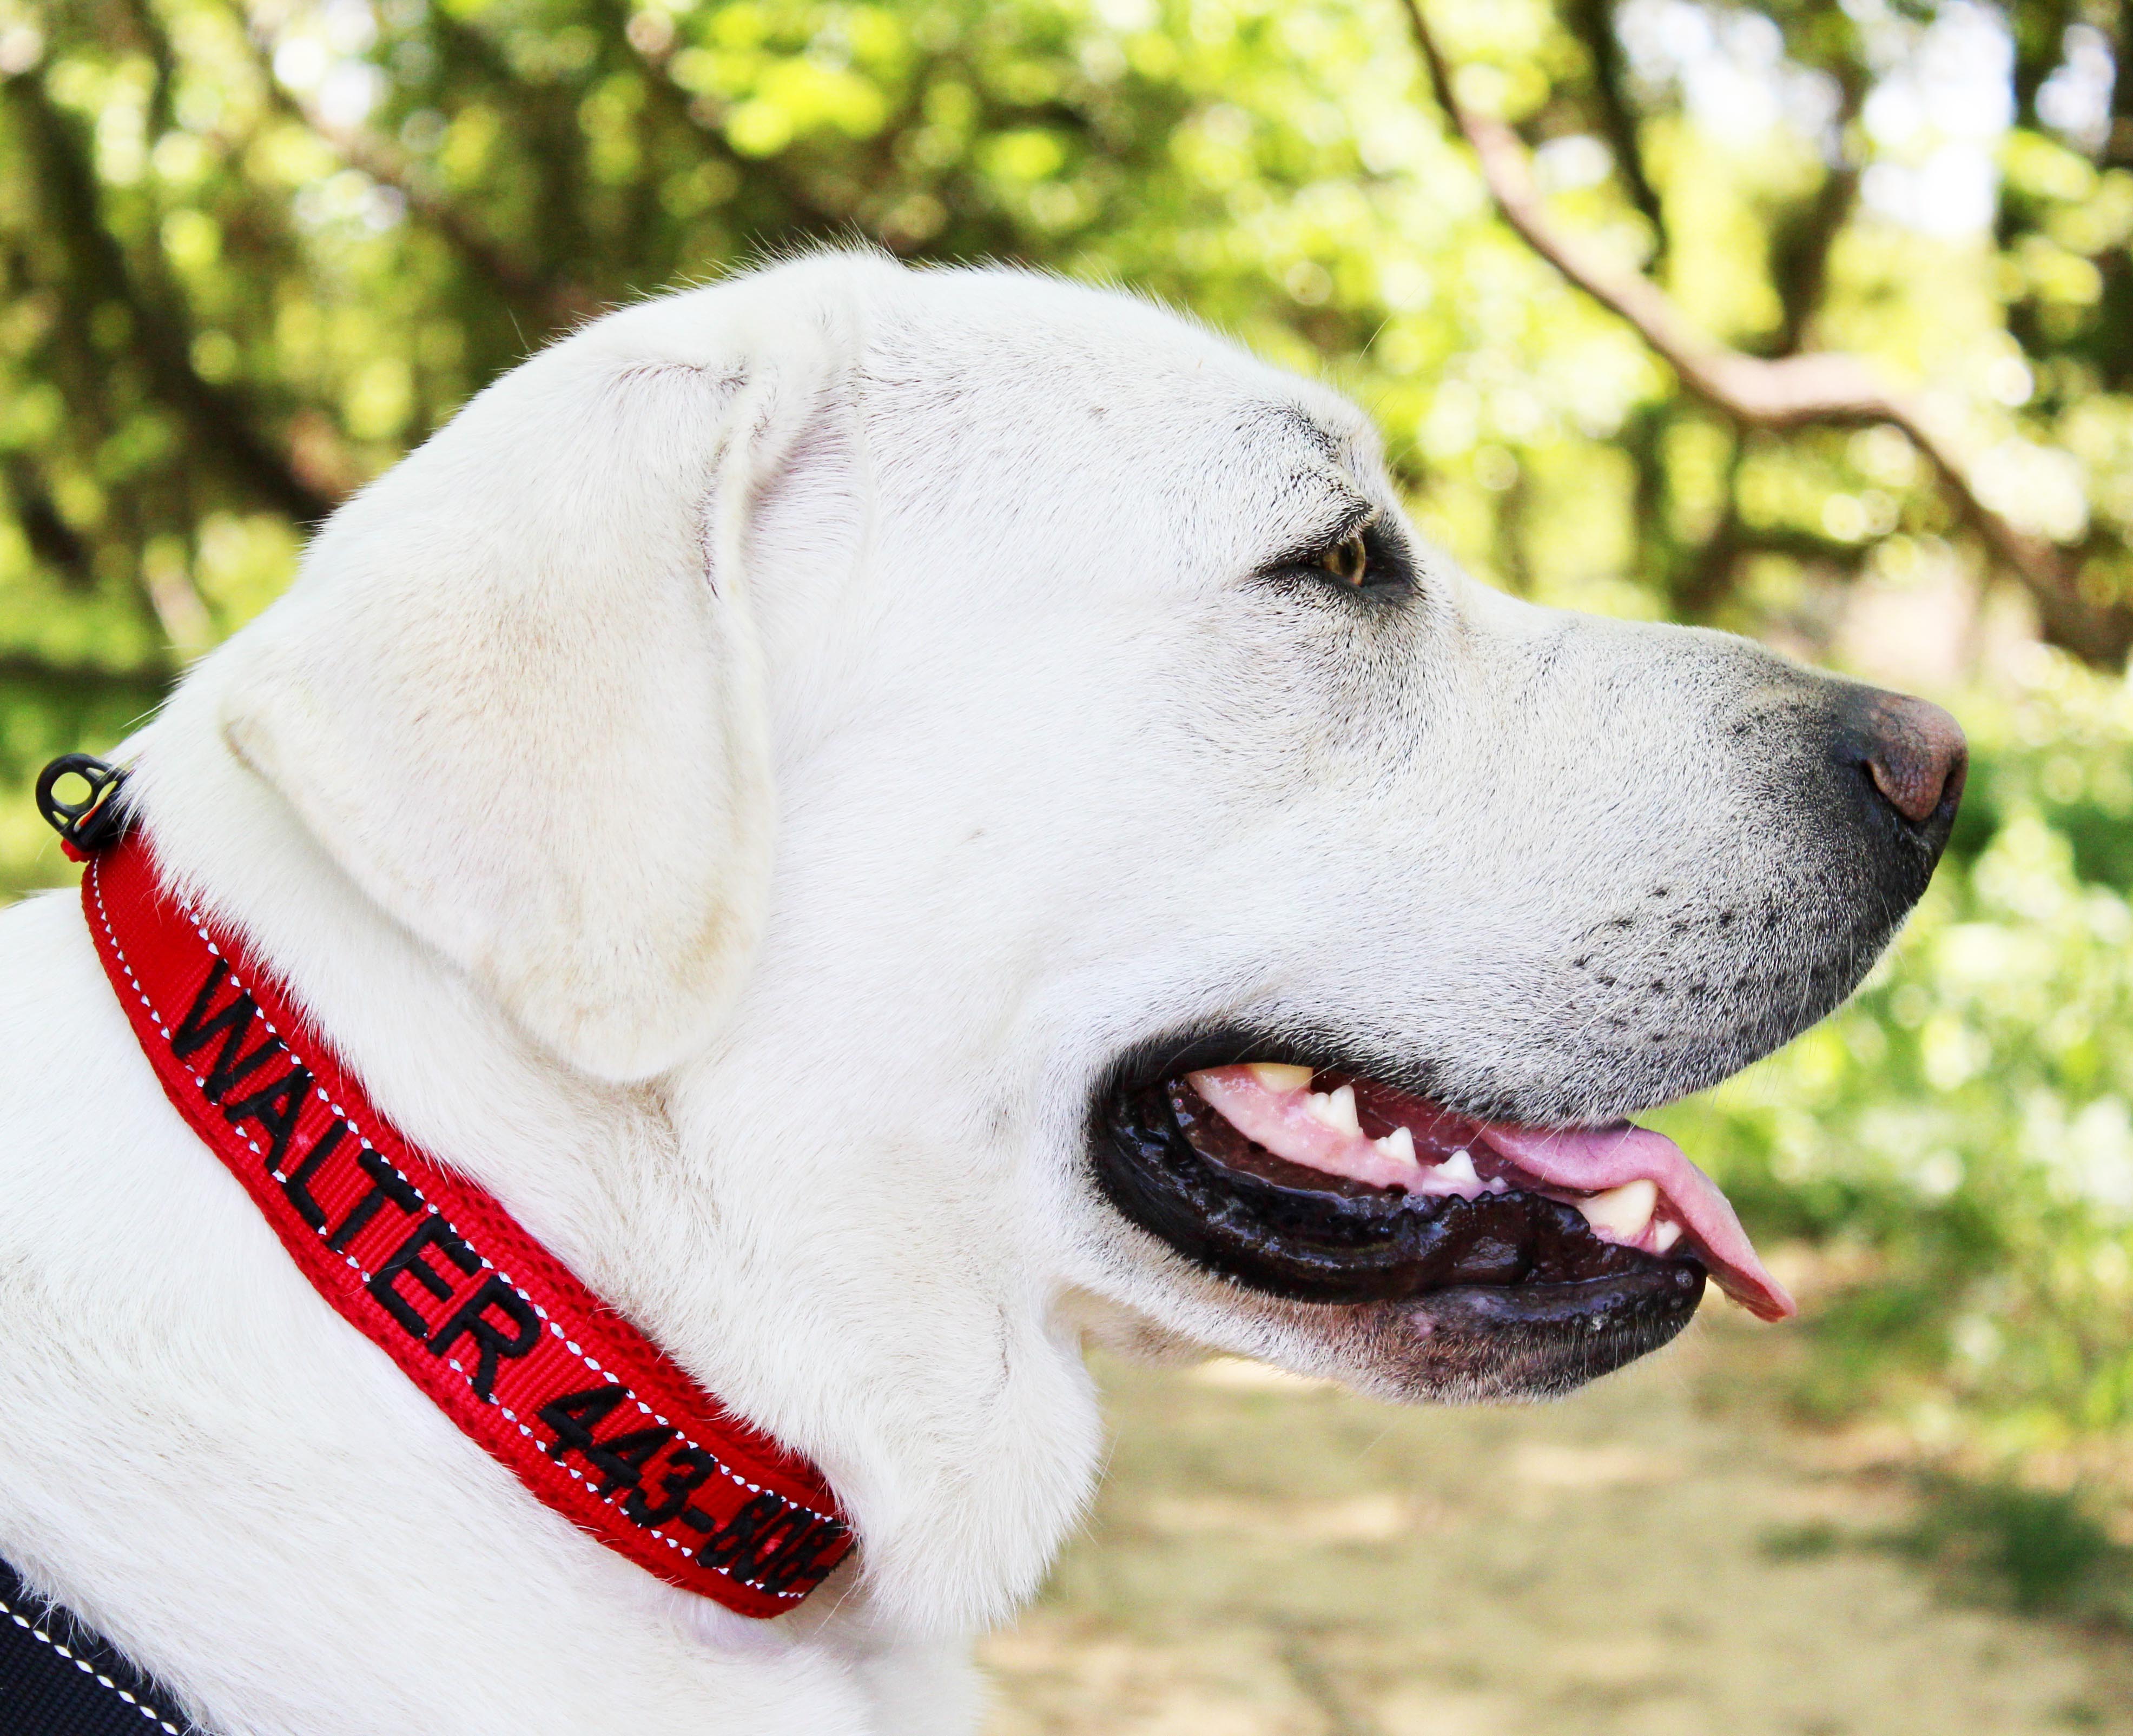 Personalized Dog Collars - Are They Worth the Money?